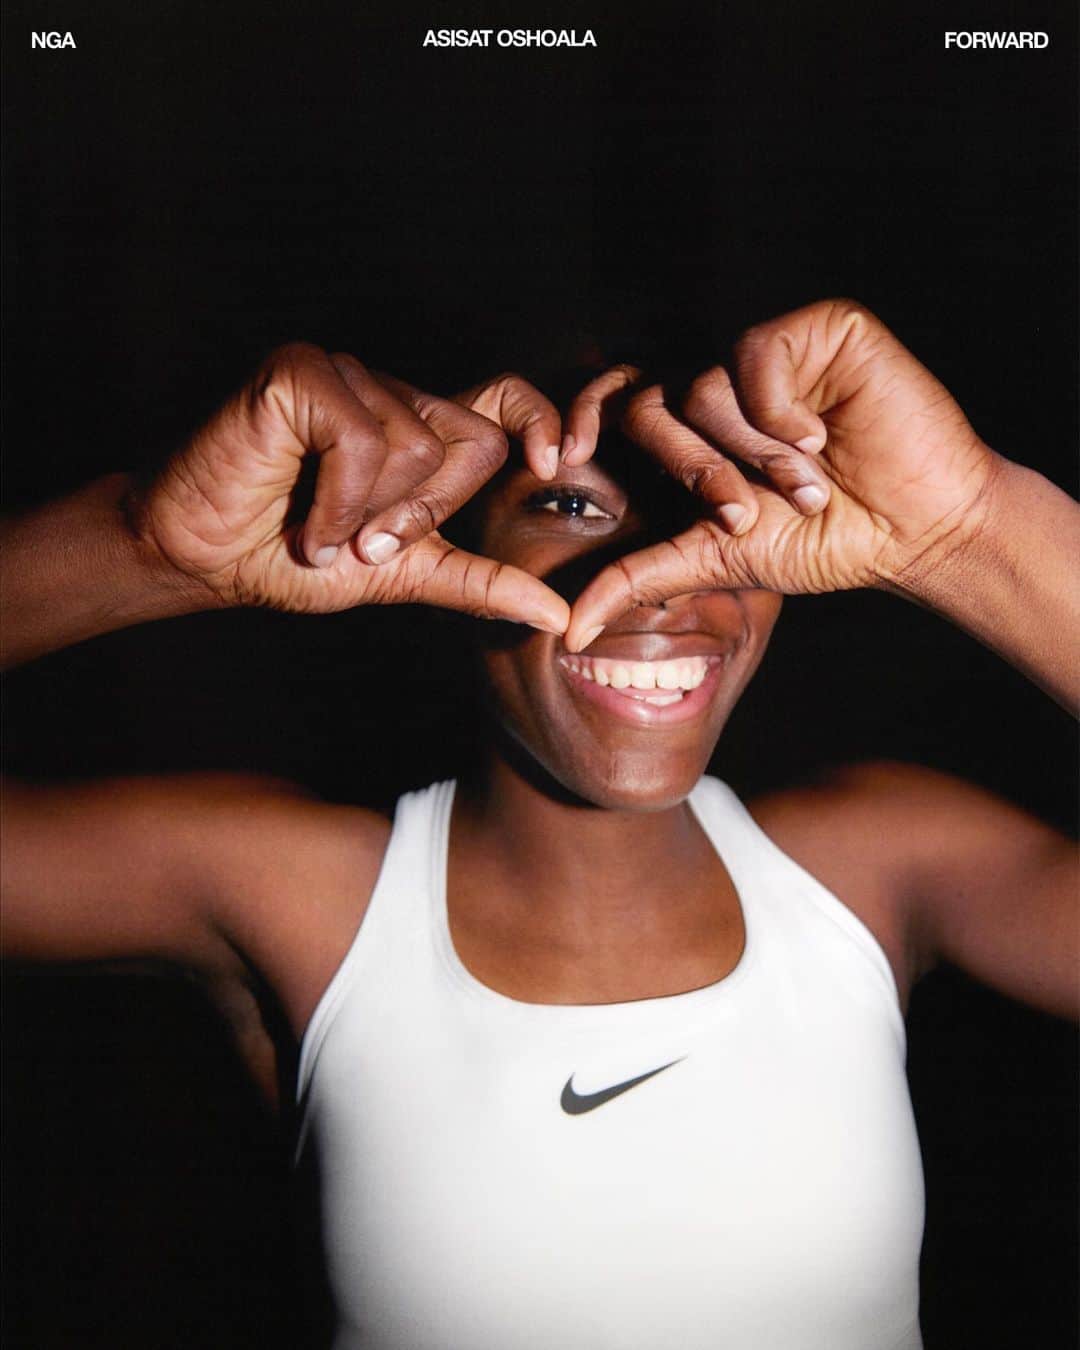 NIKEのインスタグラム：「"A good sports bra helps make me feel free enough to worry about nothing." - Asisat Oshoala   Five-time African Women's Footballer of the Year and striker for Nigeria’s national team, @asisat_oshoala knows the beautiful game like the back of her hand. She also knows how crucial it is to feel supported while you play it. Engineered for ultimate security, the new Nike Swoosh Bra gives Asisat, and every athlete, the confidence to play fearlessly. Now you can take to the pitch knowing the Swoosh Bra will be doing its job, while you do yours. 🏆🕊️  Link in bio to shop the new Nike Swoosh Bras. ⚡️」